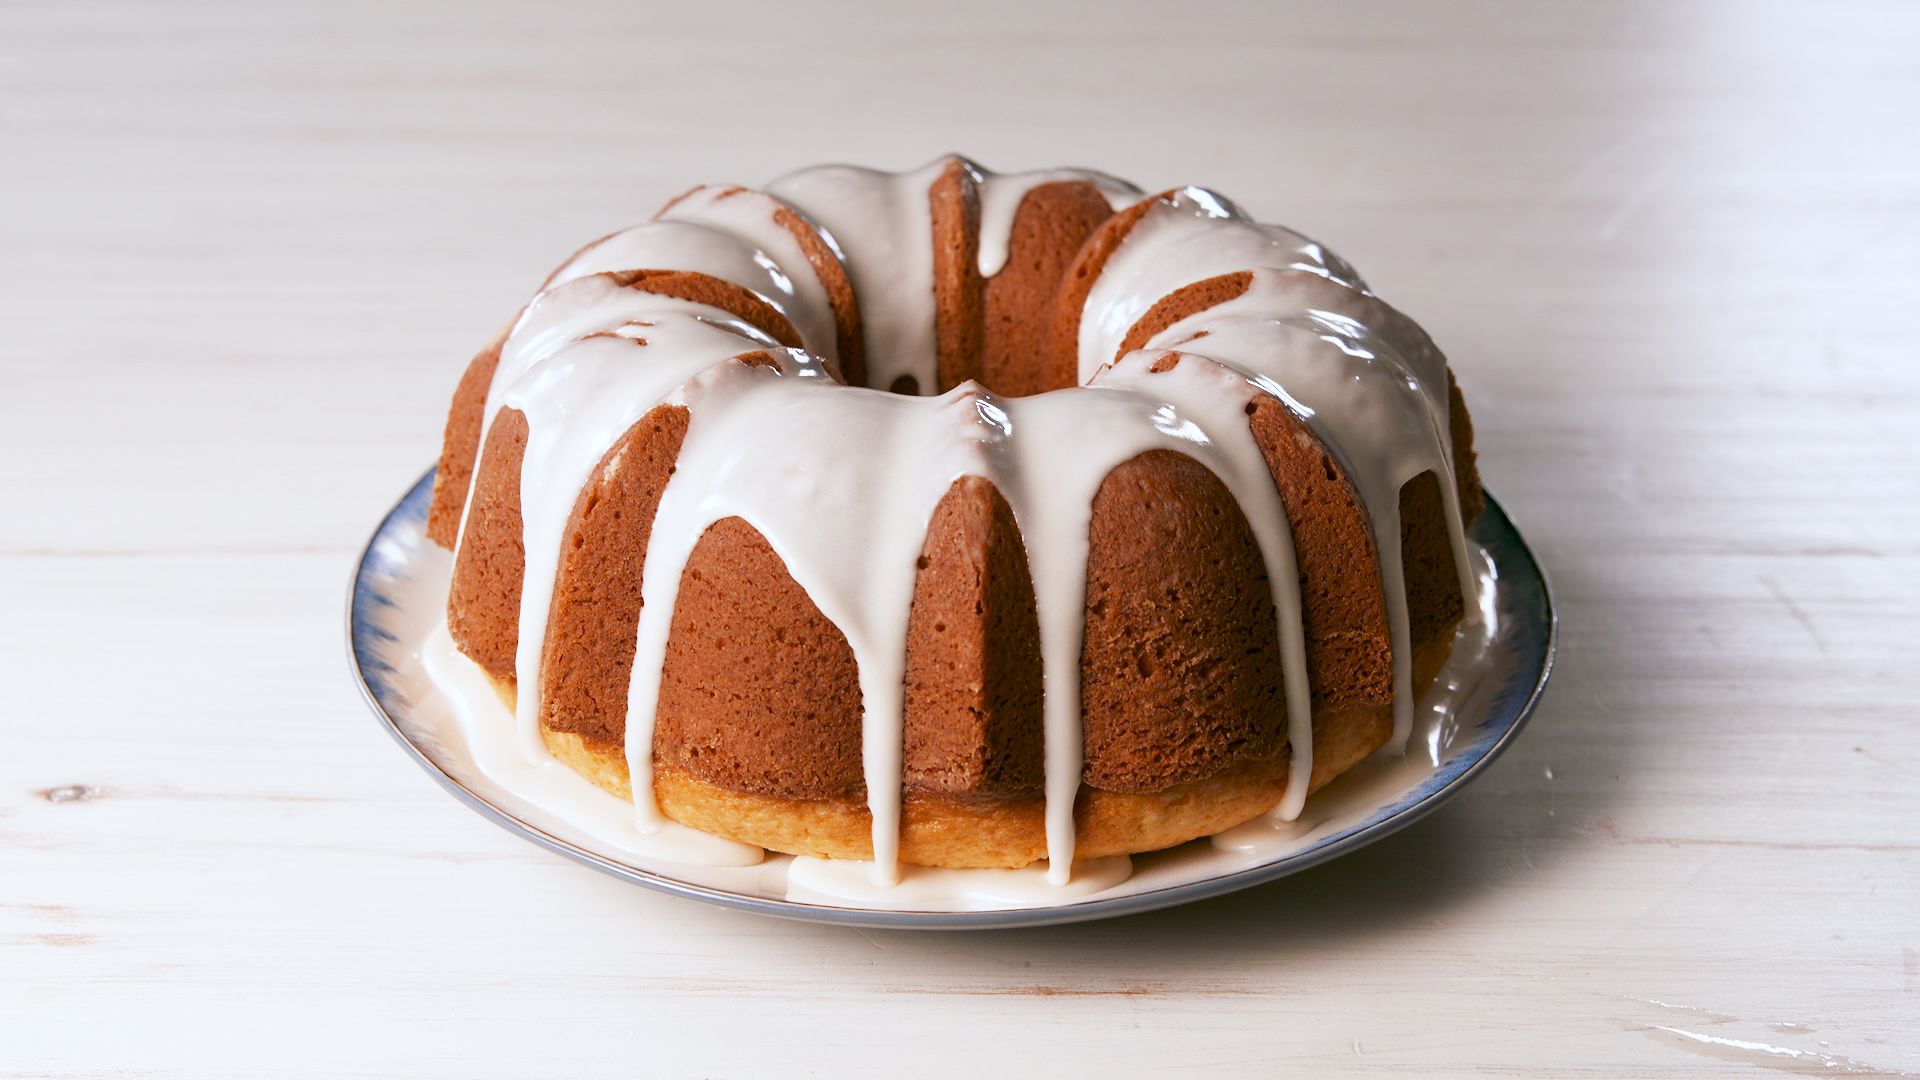 Stack Your Bundt Cakes For A Truly Showstopping Dessert